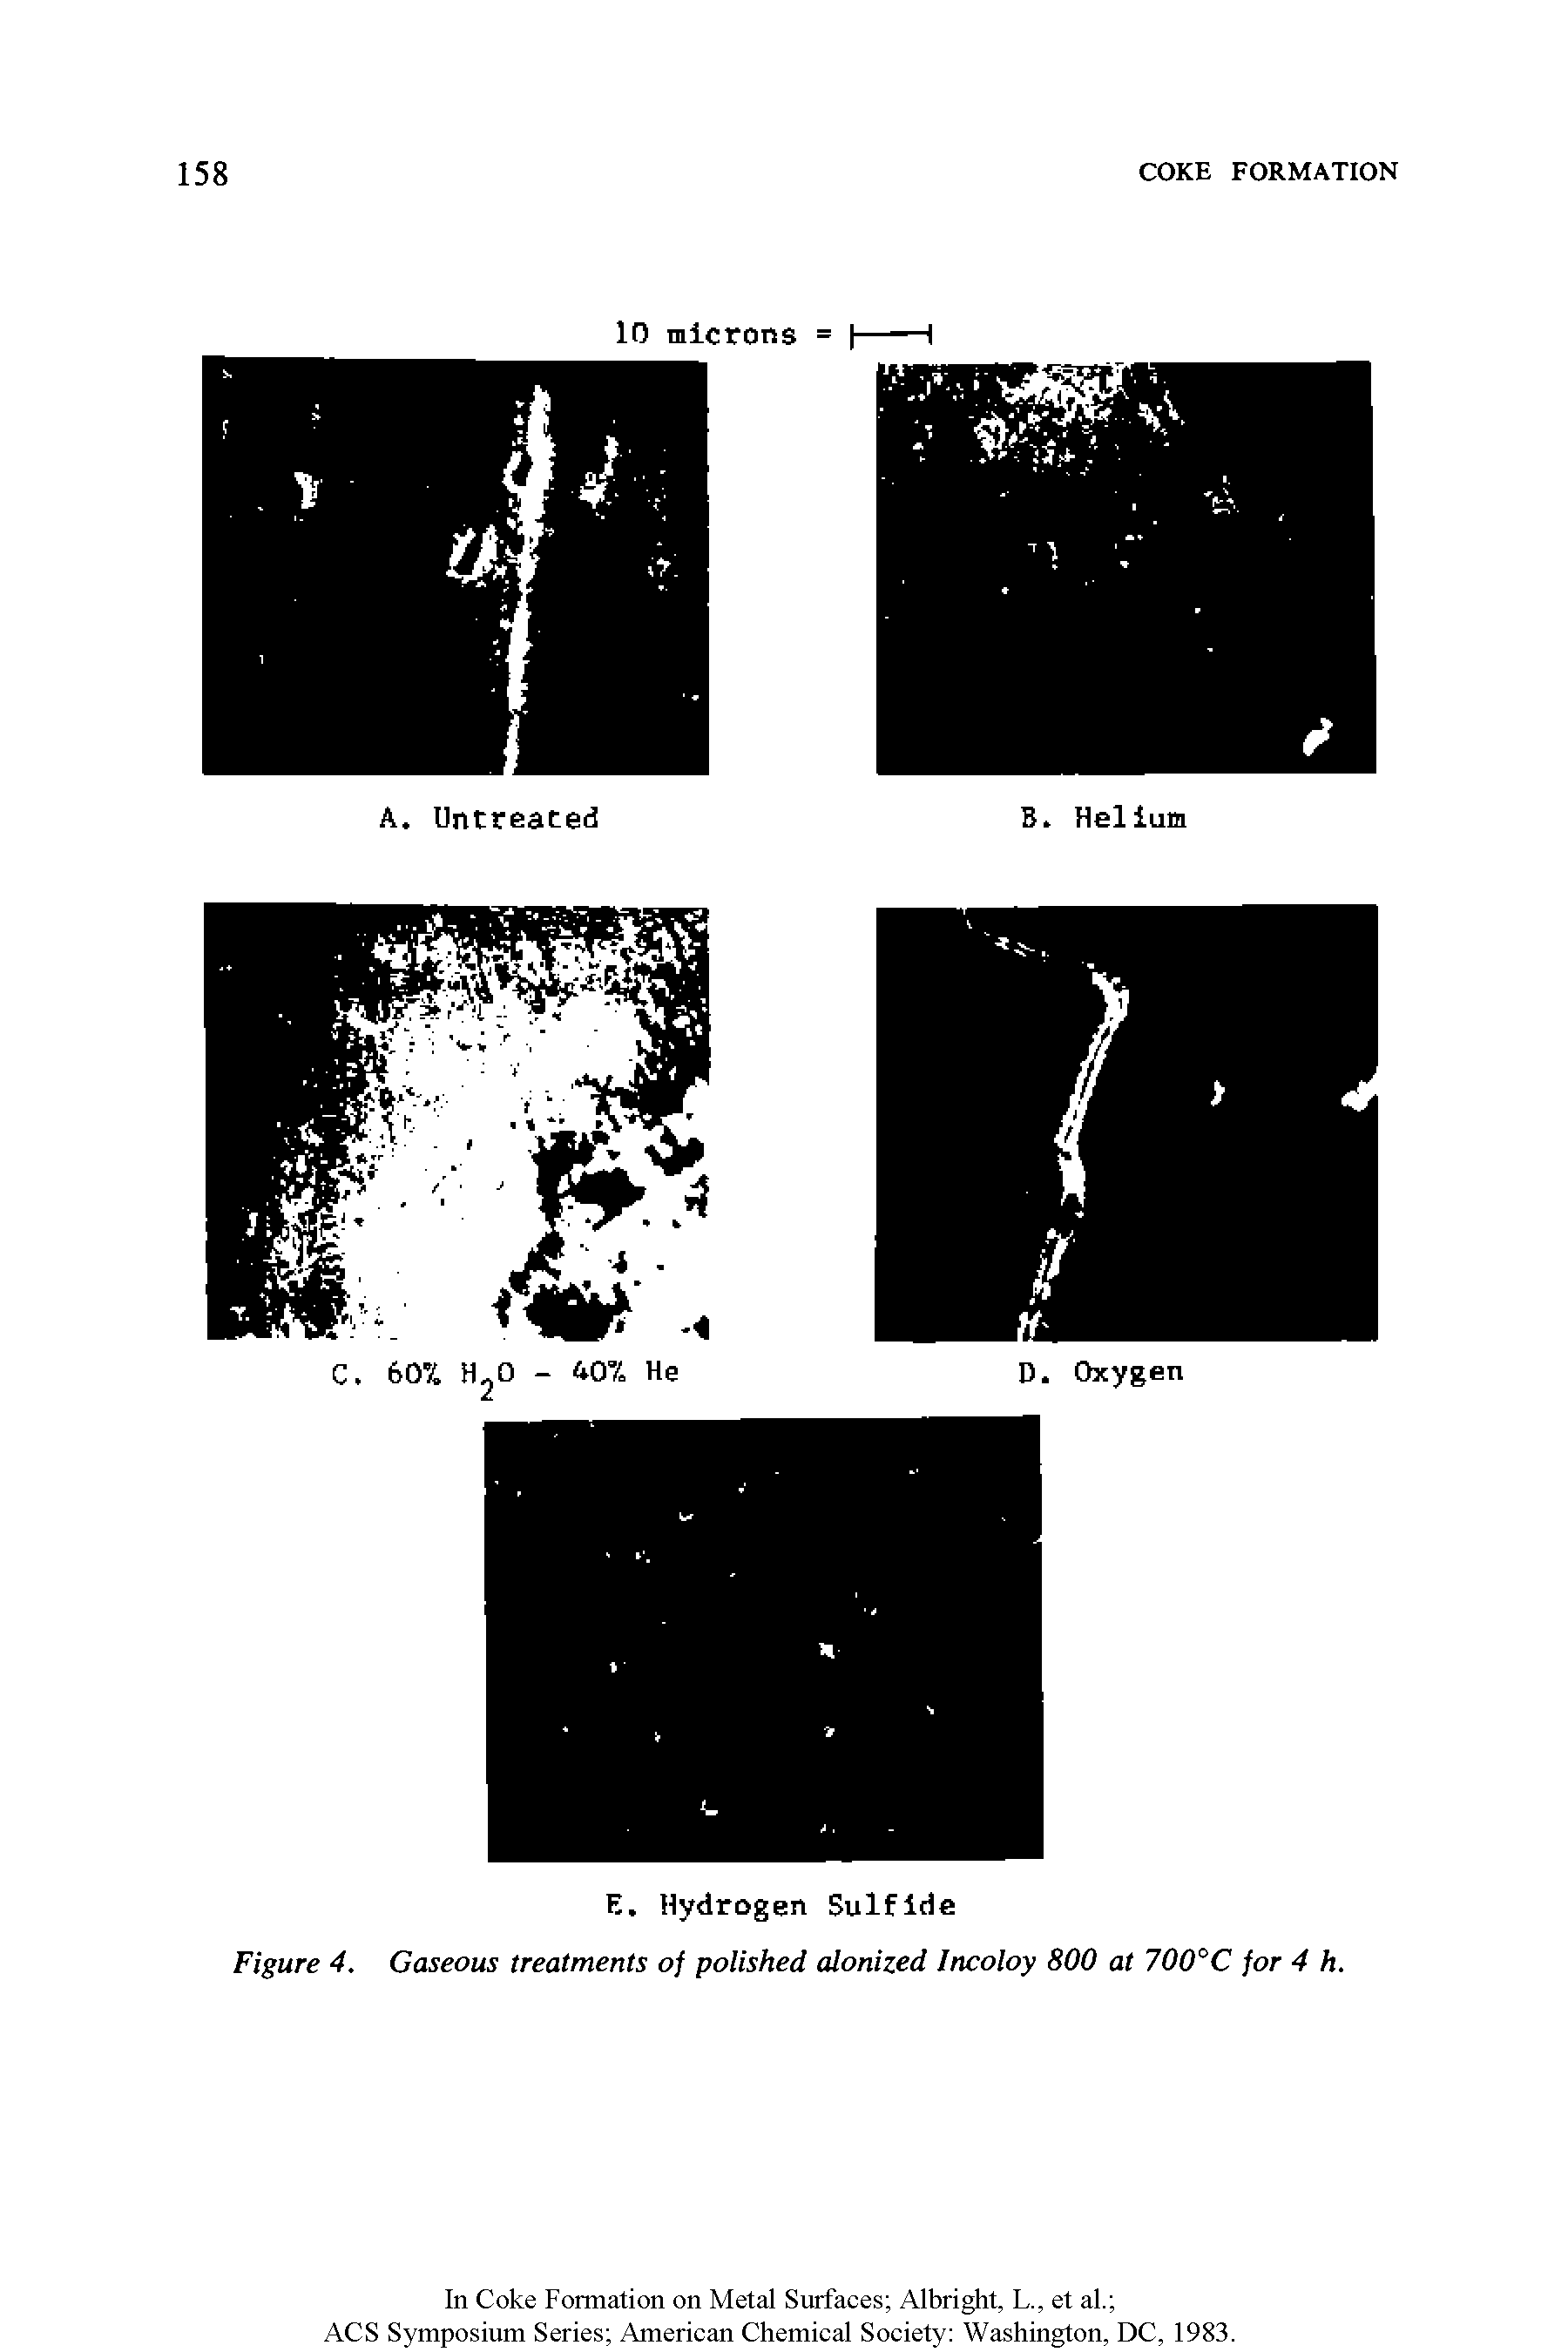 Figure 4. Gaseous treatments of polished alonized Incoloy 800 at 700°C for 4 h.